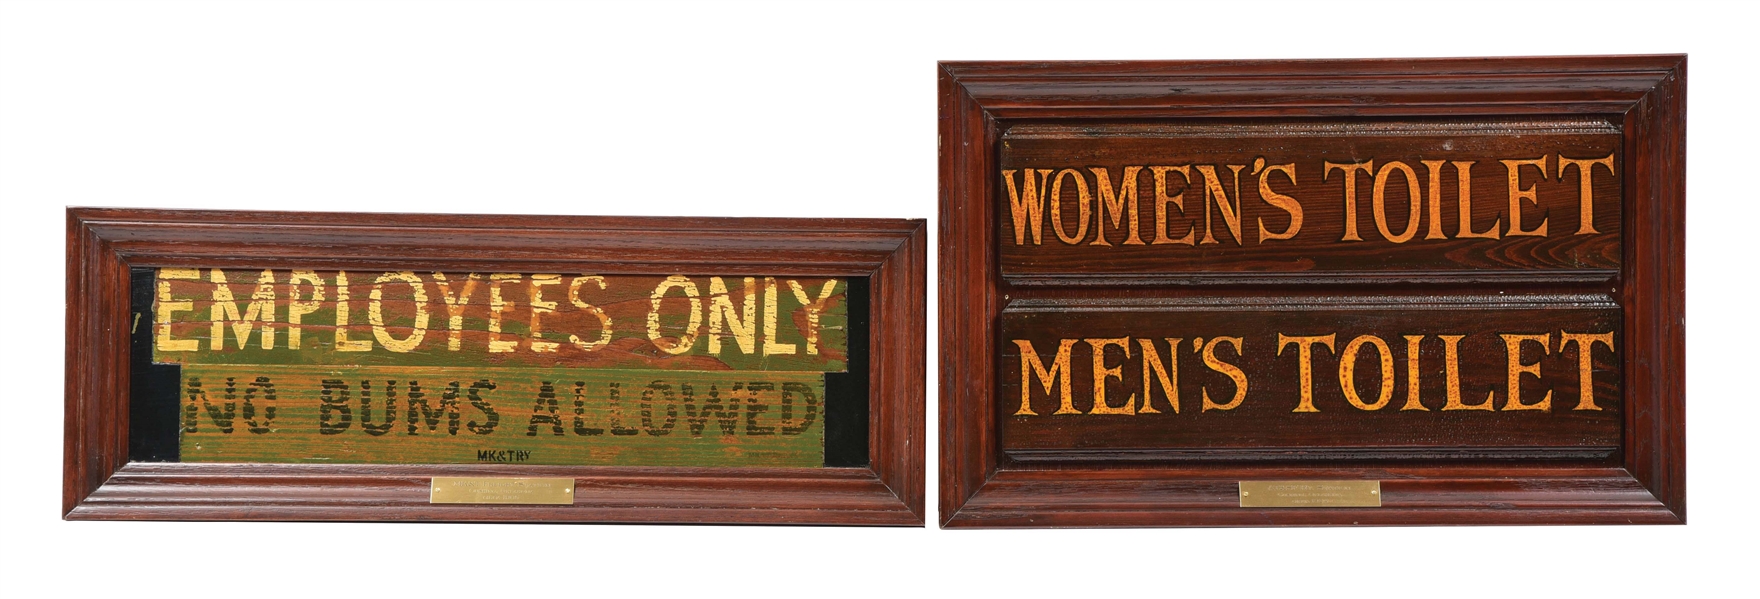 LOT OF 2: TOILET & EMPLOYEES ONLY WOODEN RAILROAD SIGNS.